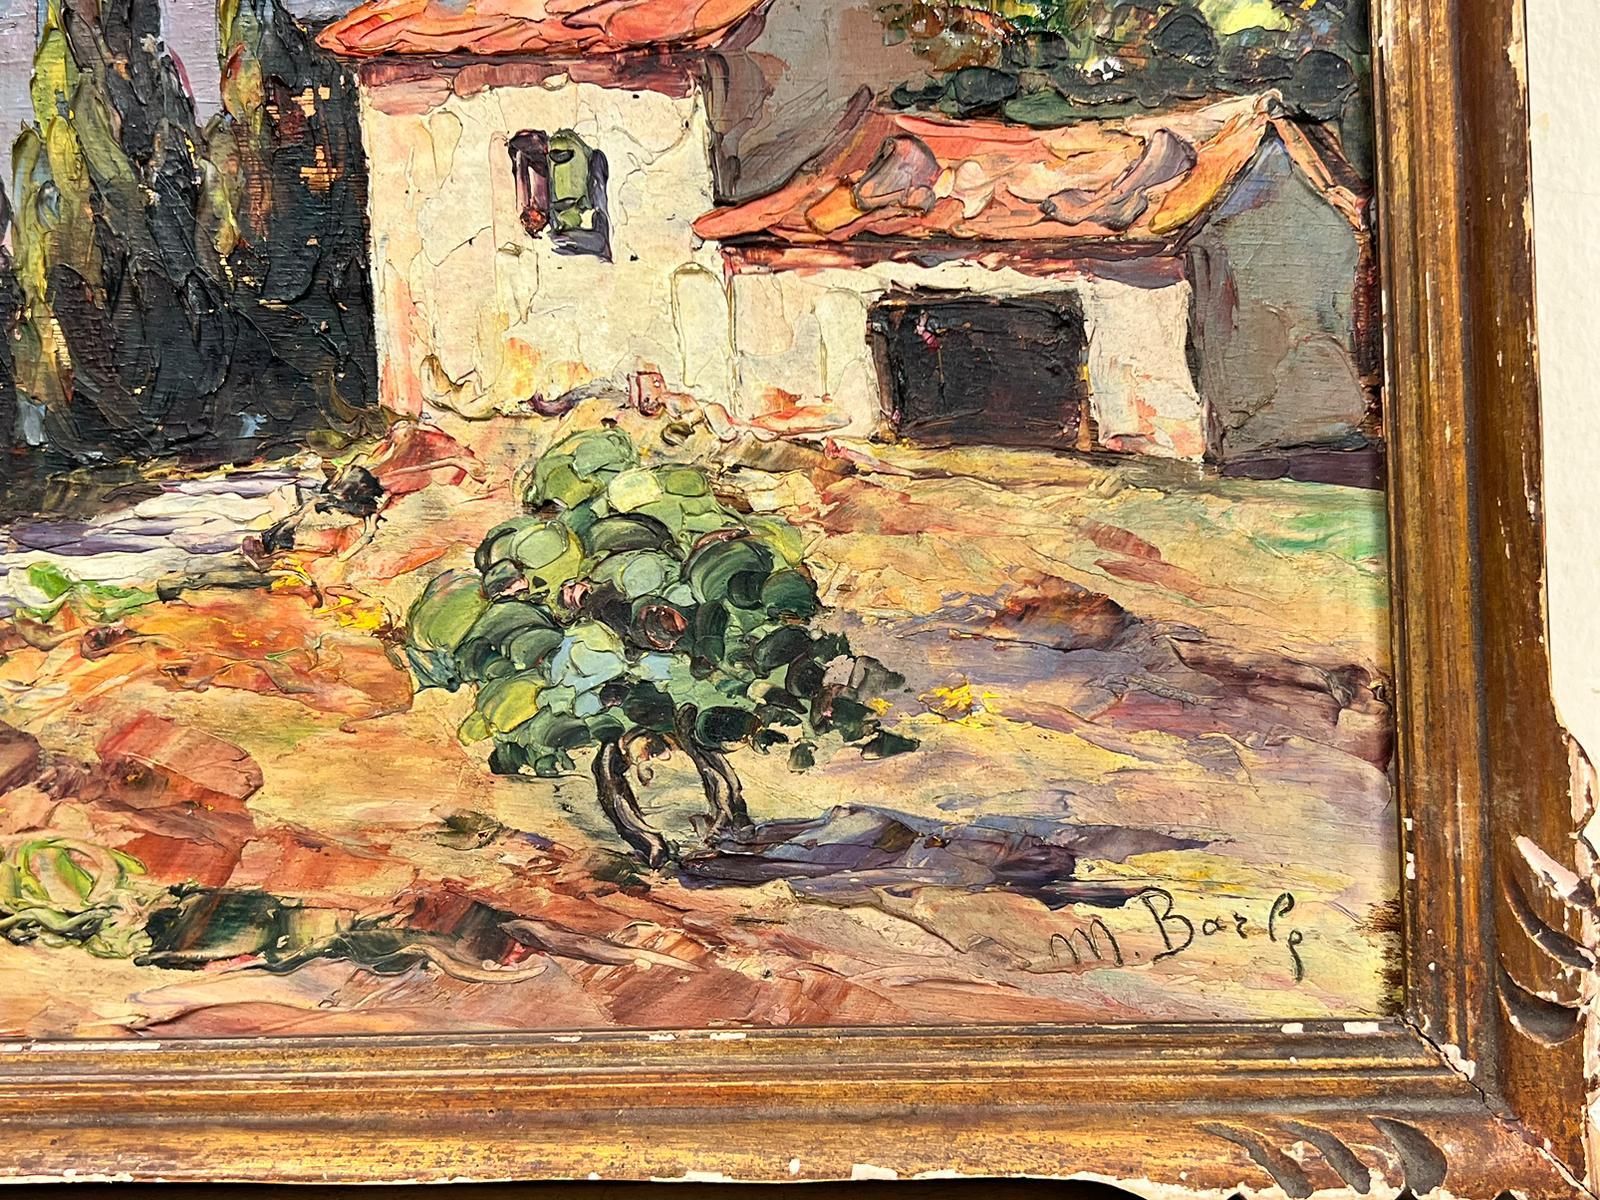 French school, mid 20th century 
signed oil on board, framed
framed: 10 x 20 inches
board: 9 x 18inches
private collection, France
the painting is in overall very good and sound condition - scuffed frame